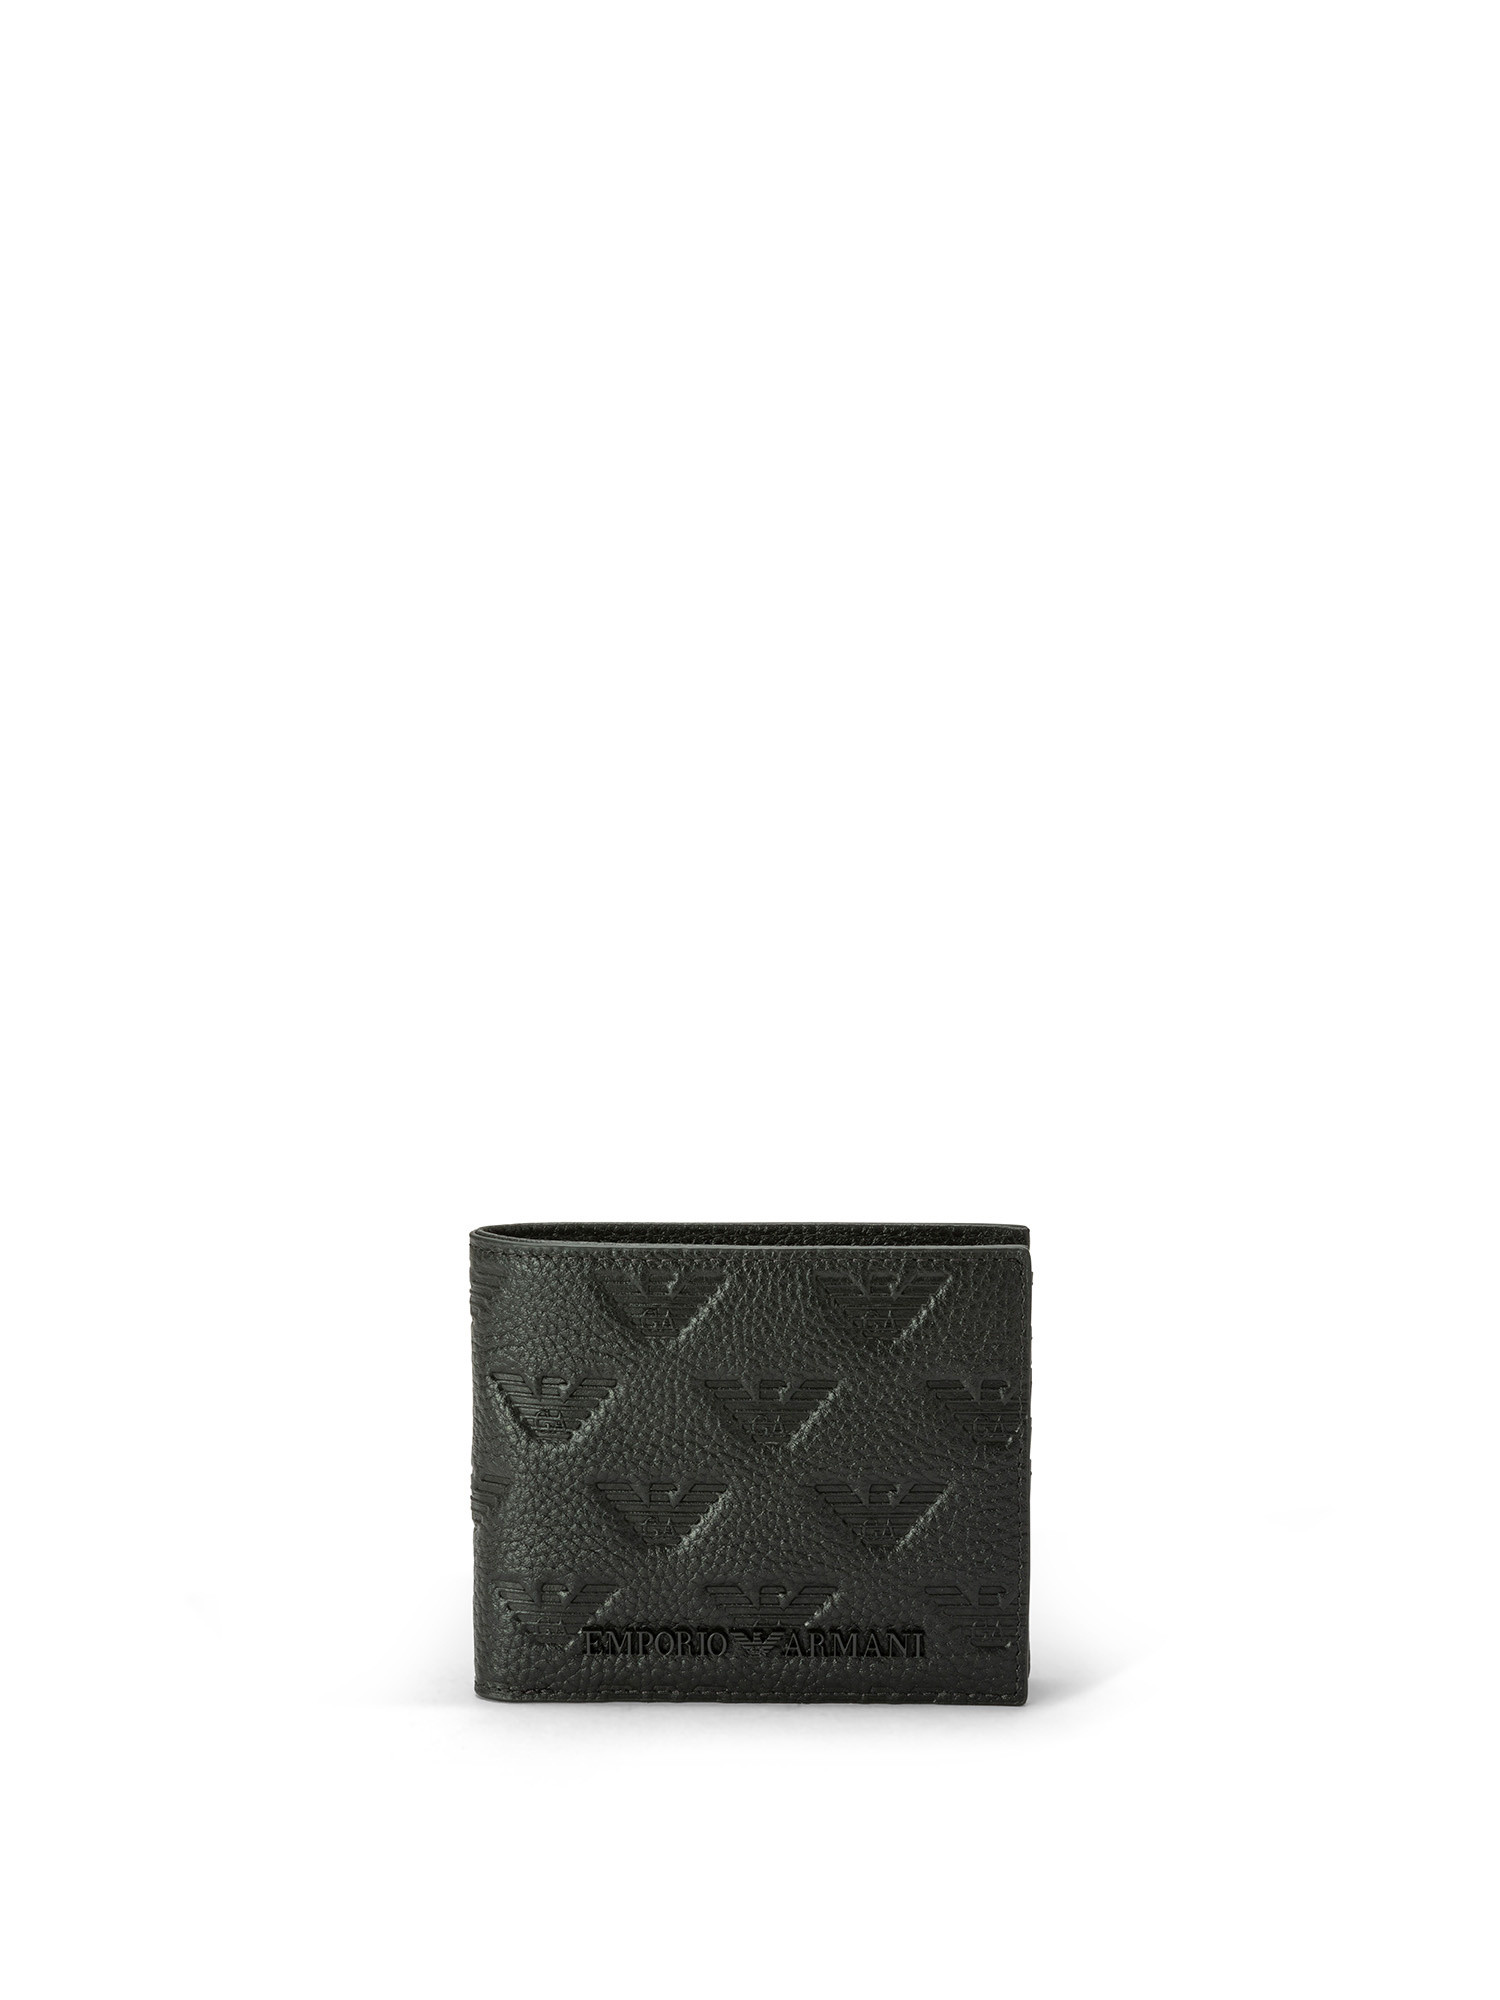 Emporio Armani - Leather wallet with all over eagle logo and coin purse, Black, large image number 0